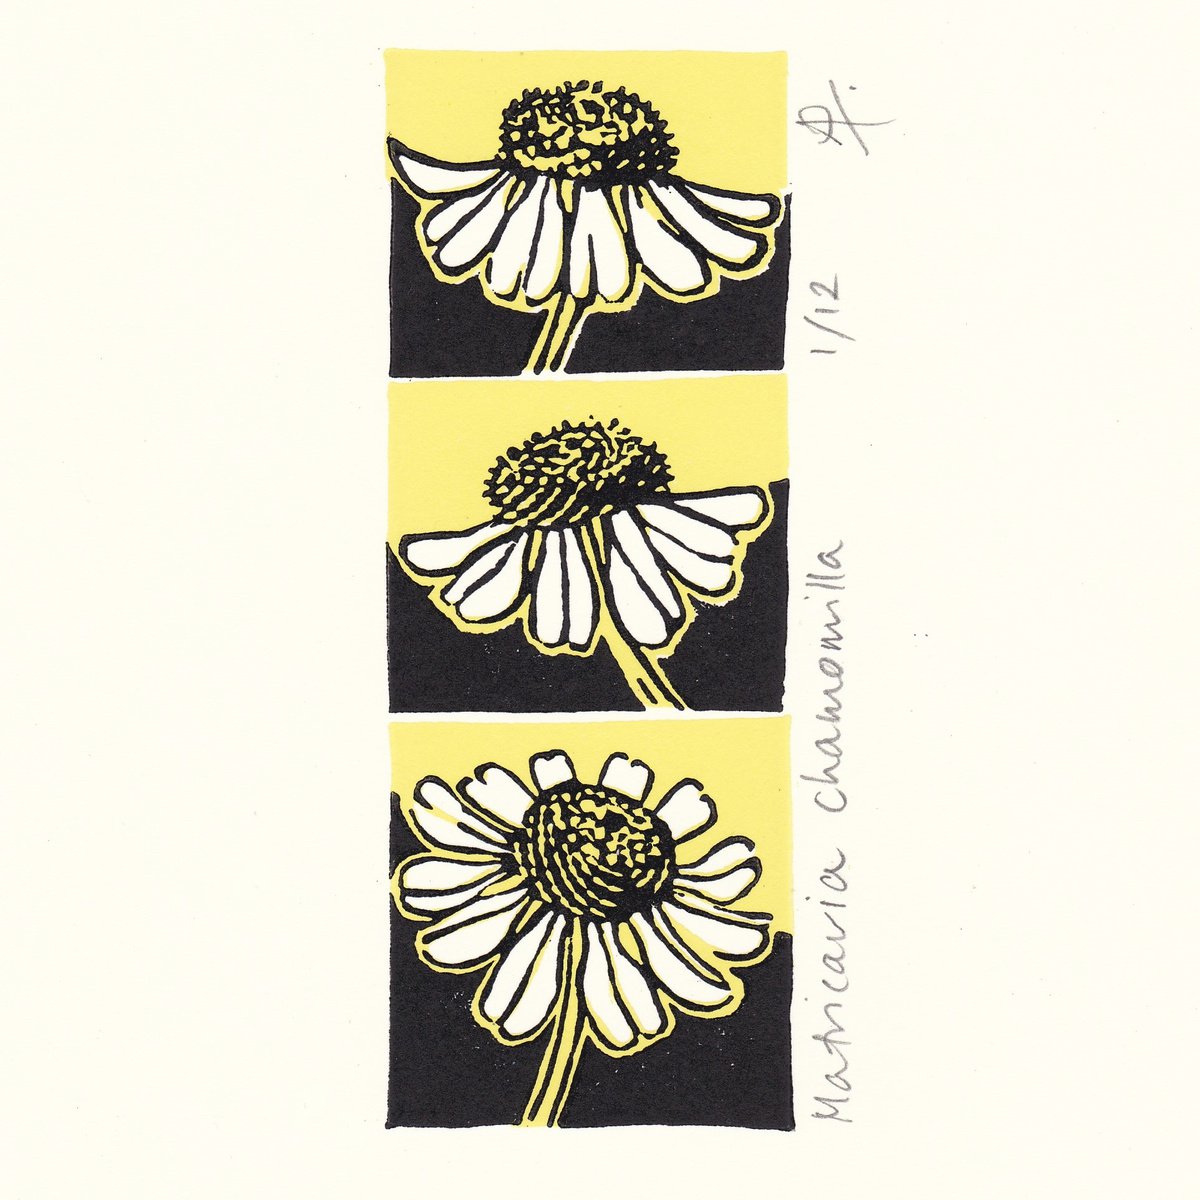 Camomile (butter and black colourway) by Alison Pearce